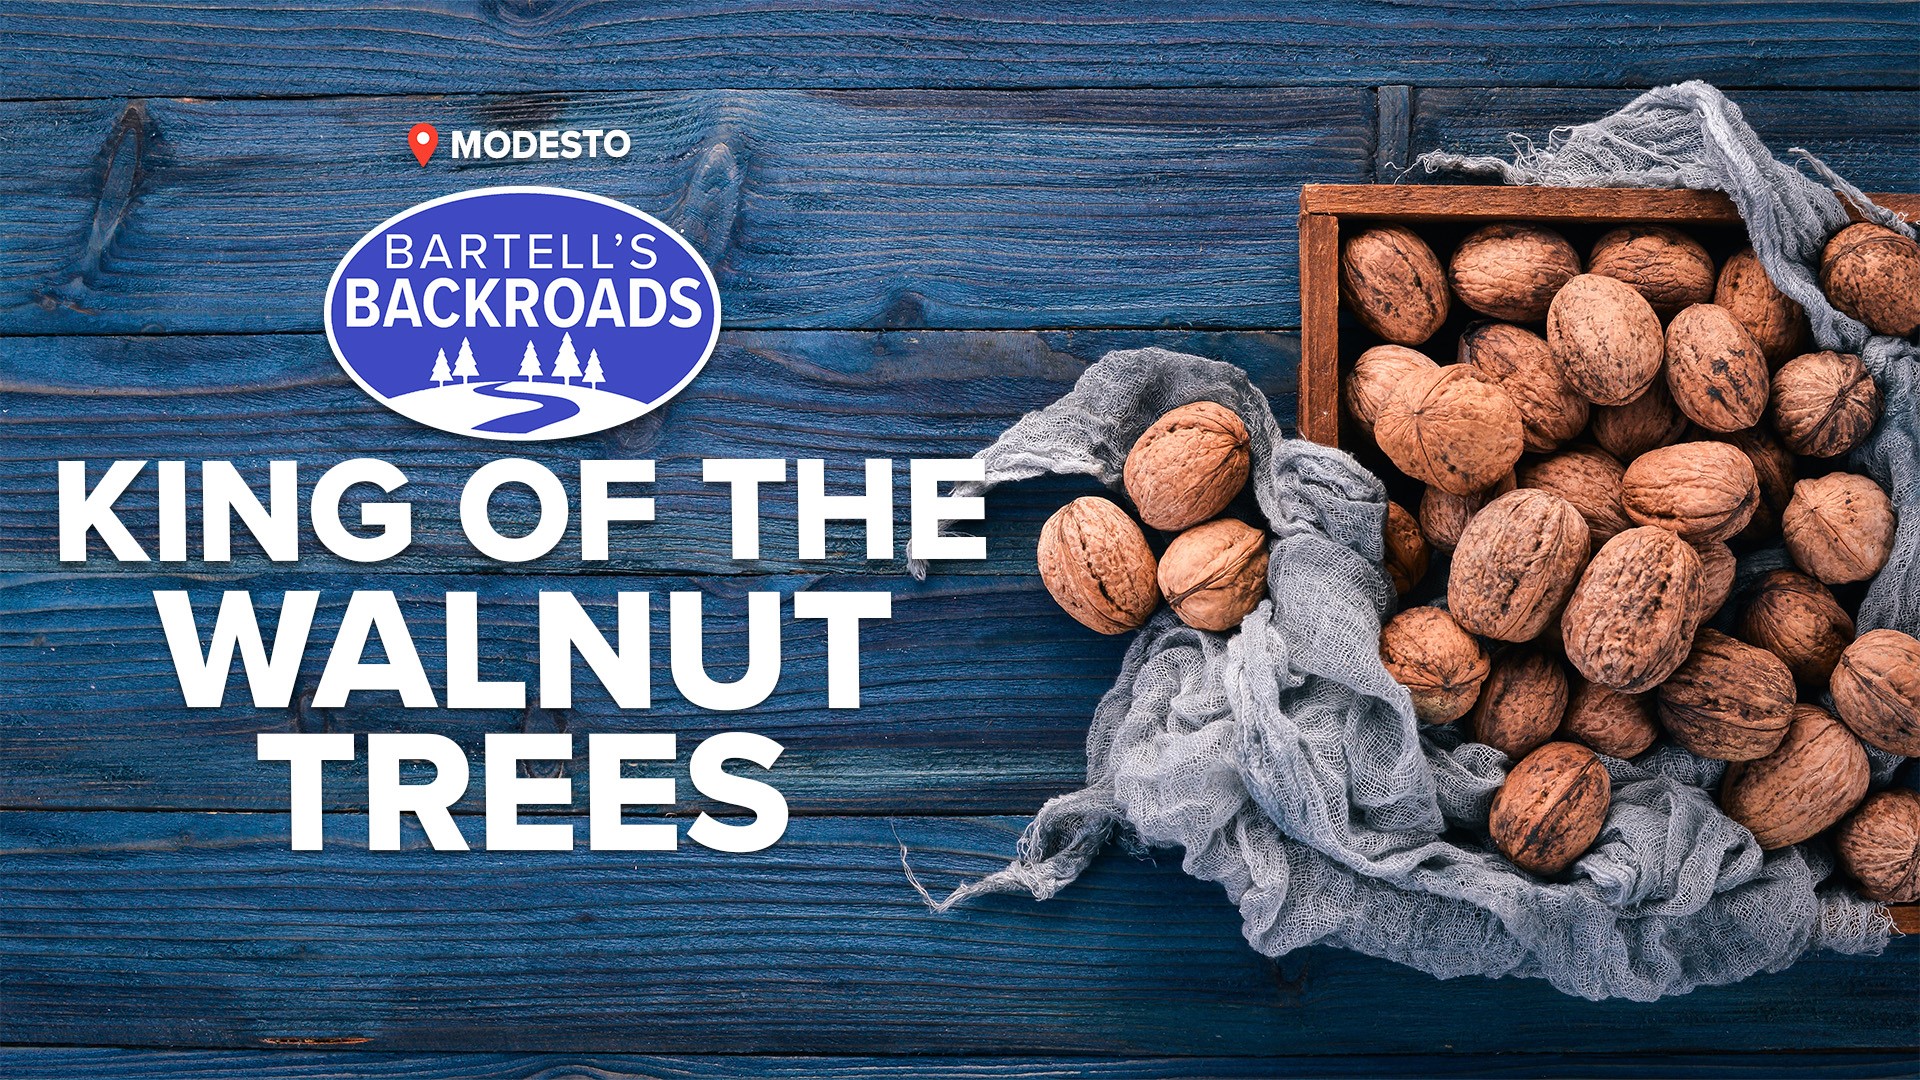 Just one tree helped turn California into a walnut growing mecca.